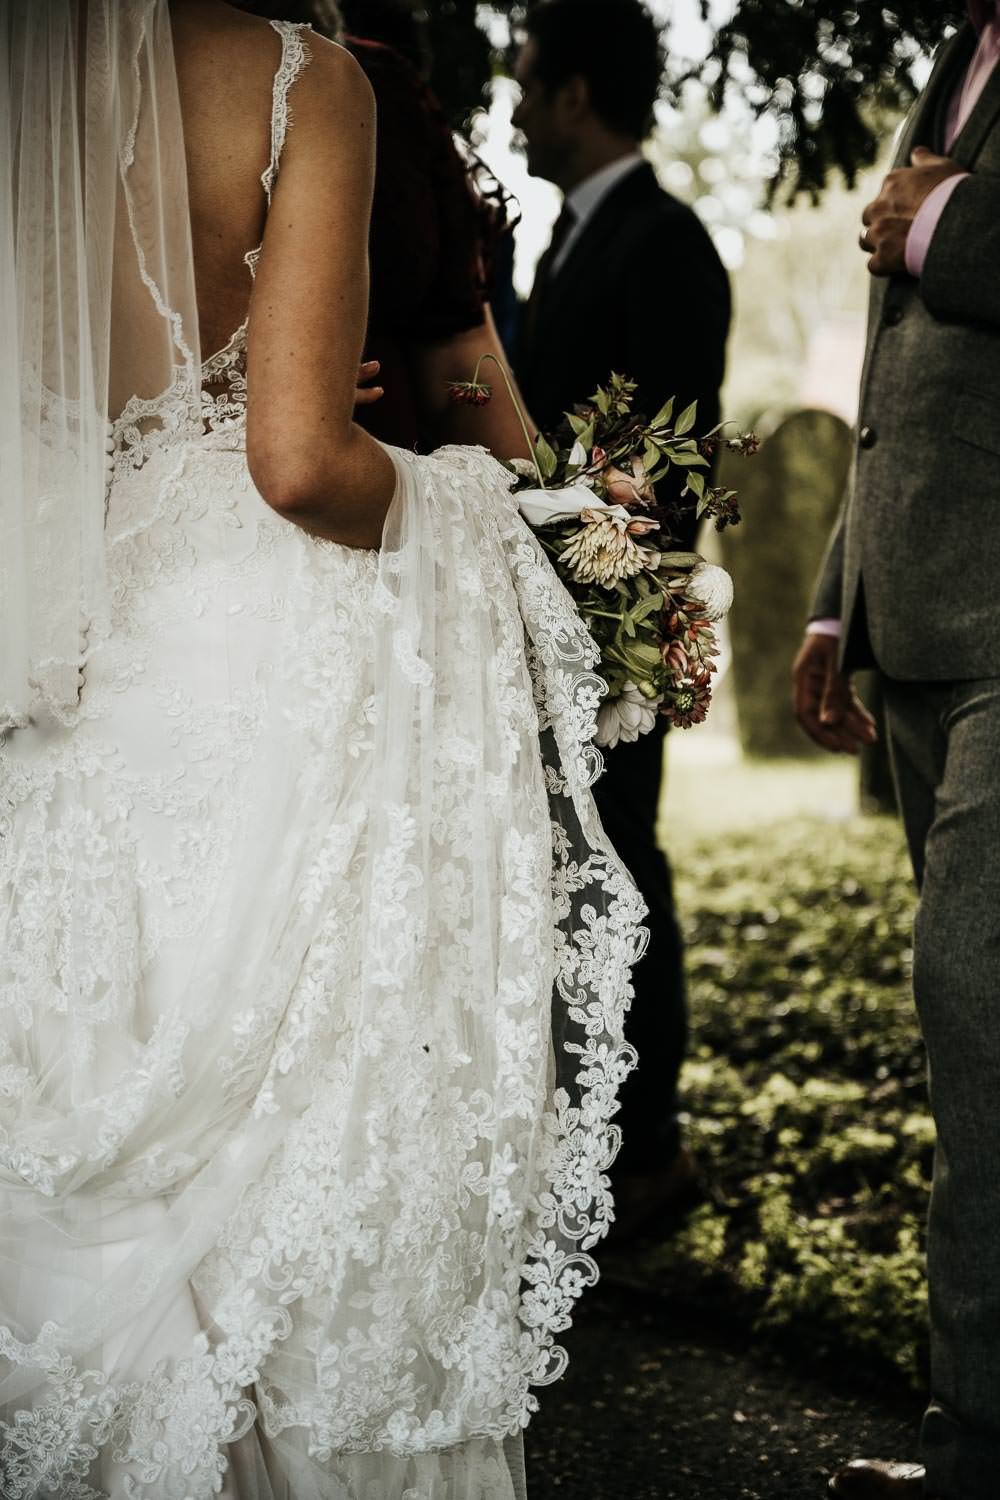 Lace wedding dress being held up by bride as she walks through church yard holding flowers